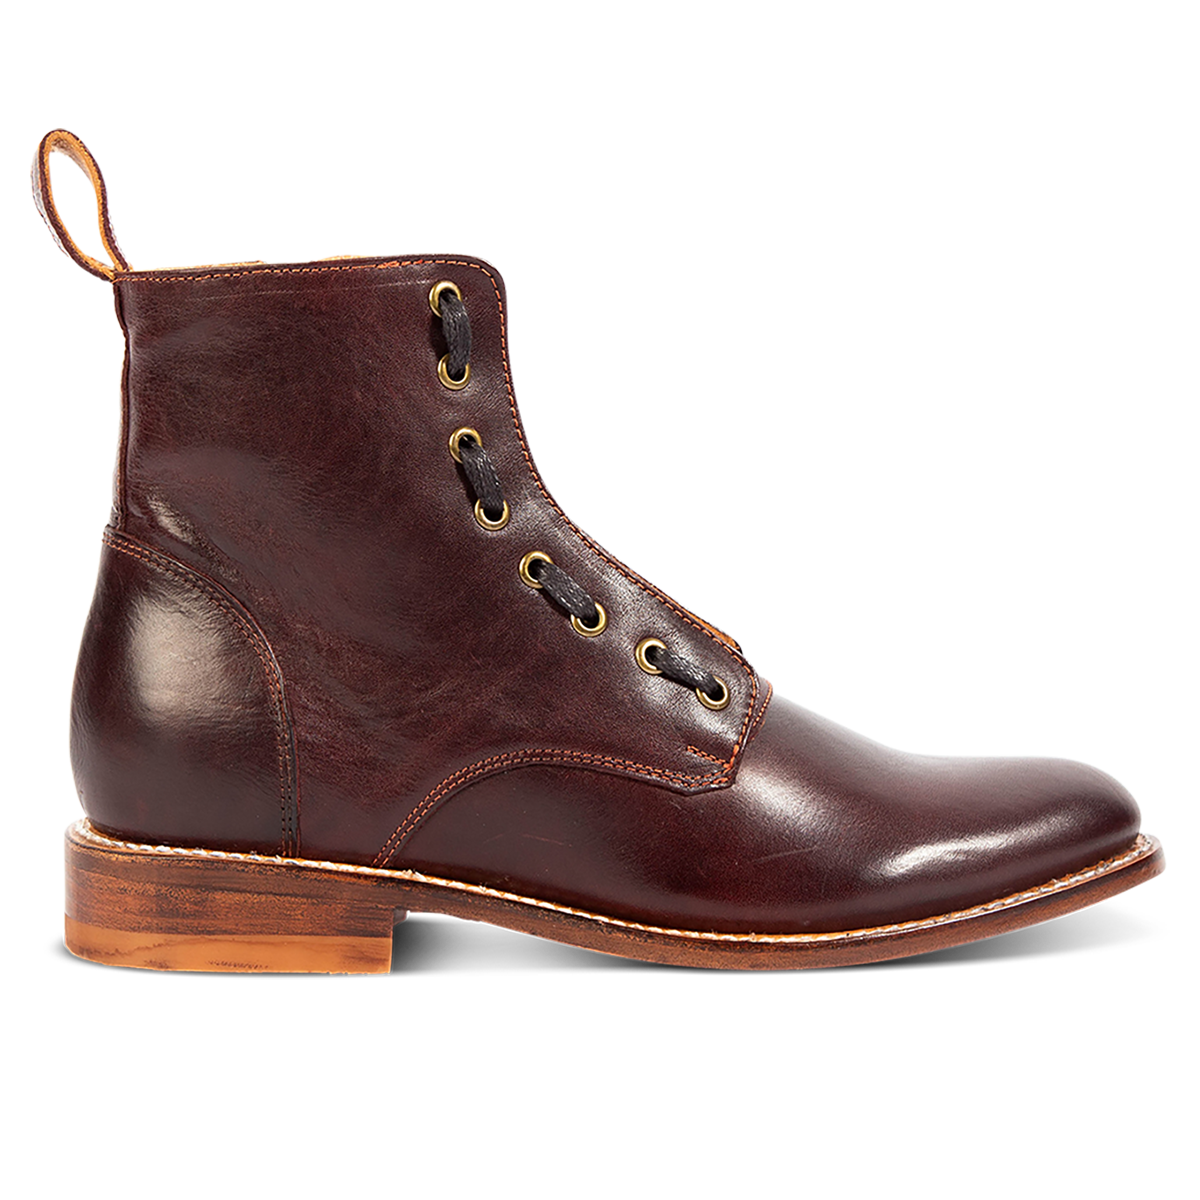 FREEBIRD men's Porter wine leather boot featuring double zip closures, adjustable front lacing and an almond toe